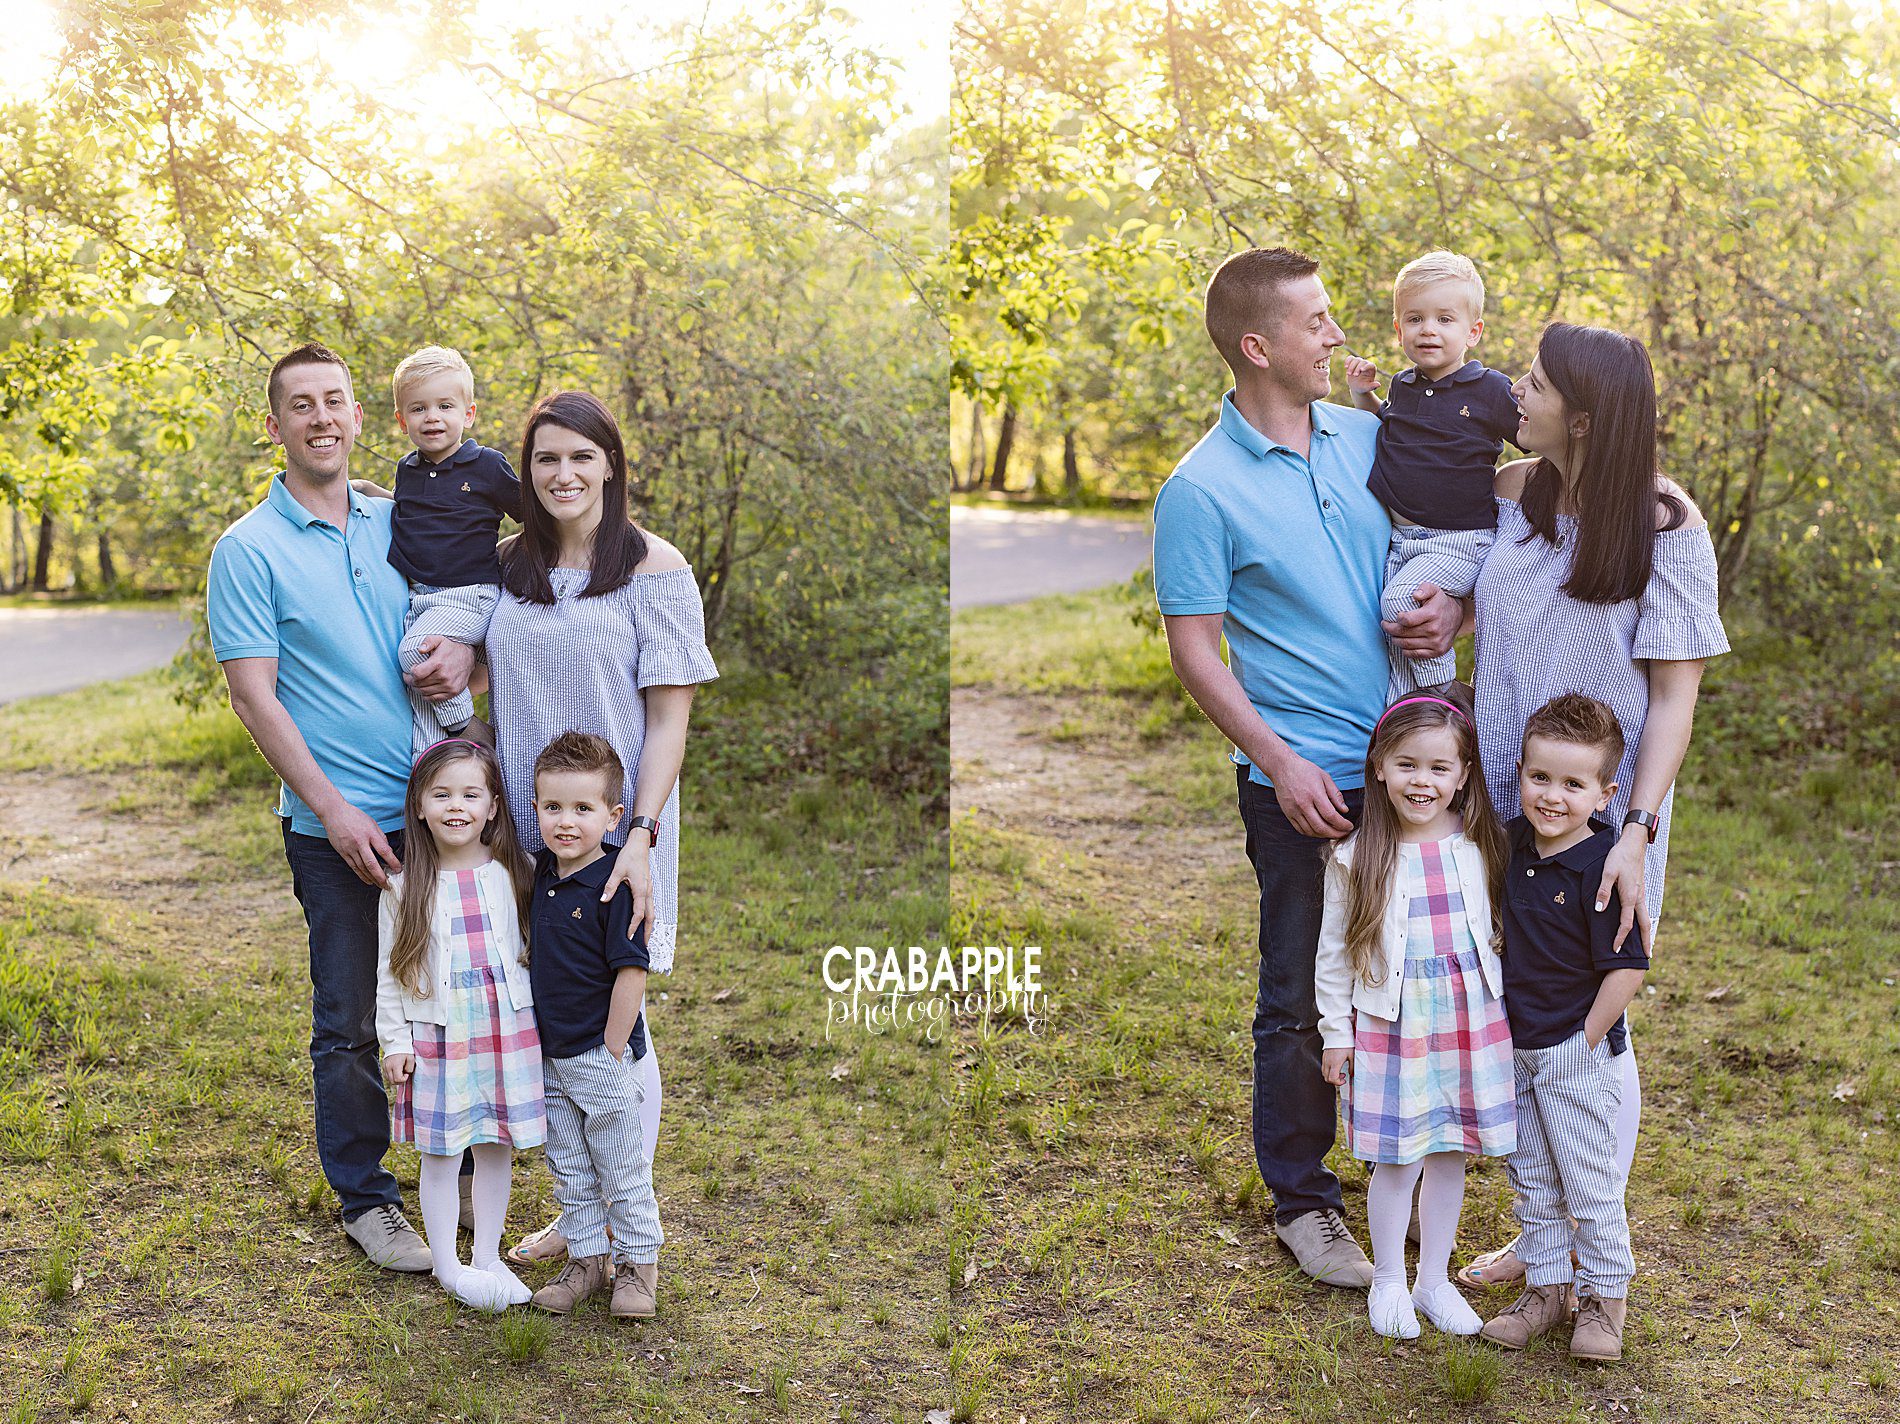 Outdoor family photos before sunset during the spring.